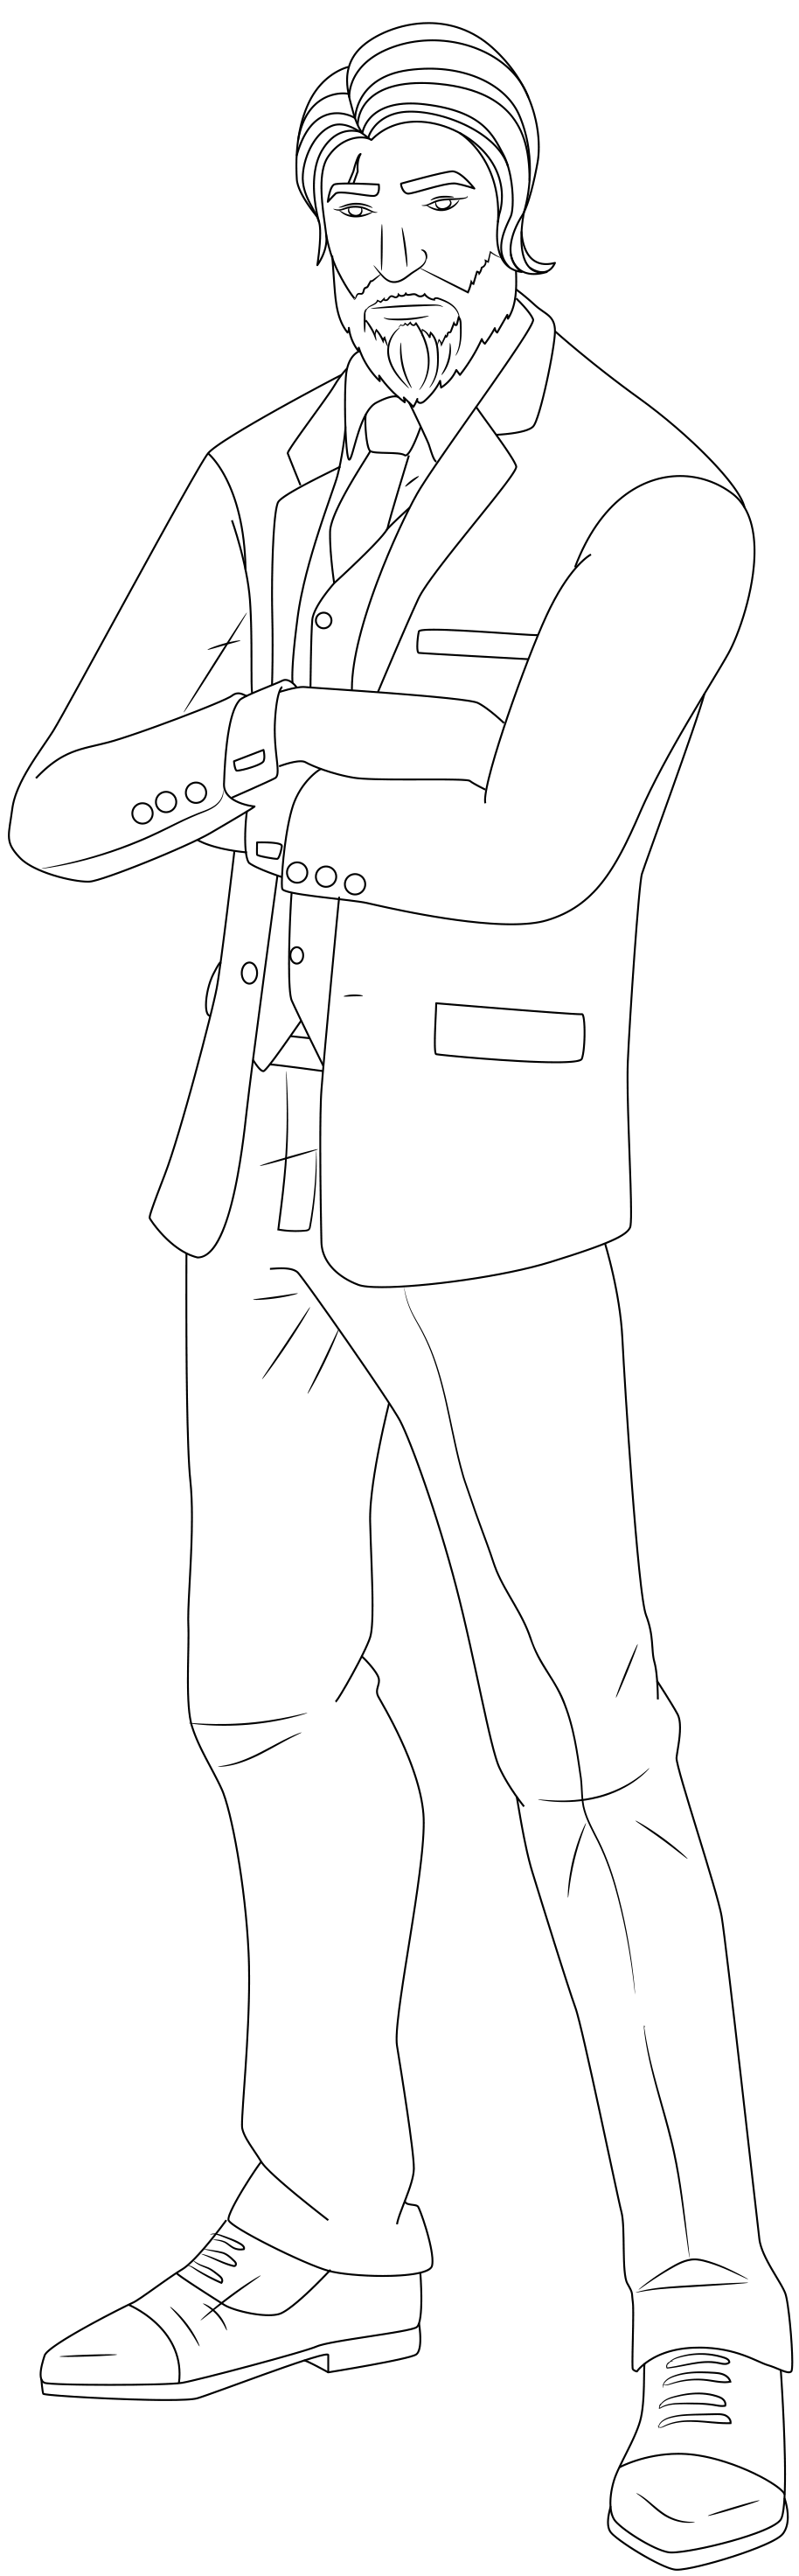 The Reaper Fortnite Skin Hd Coloring Page